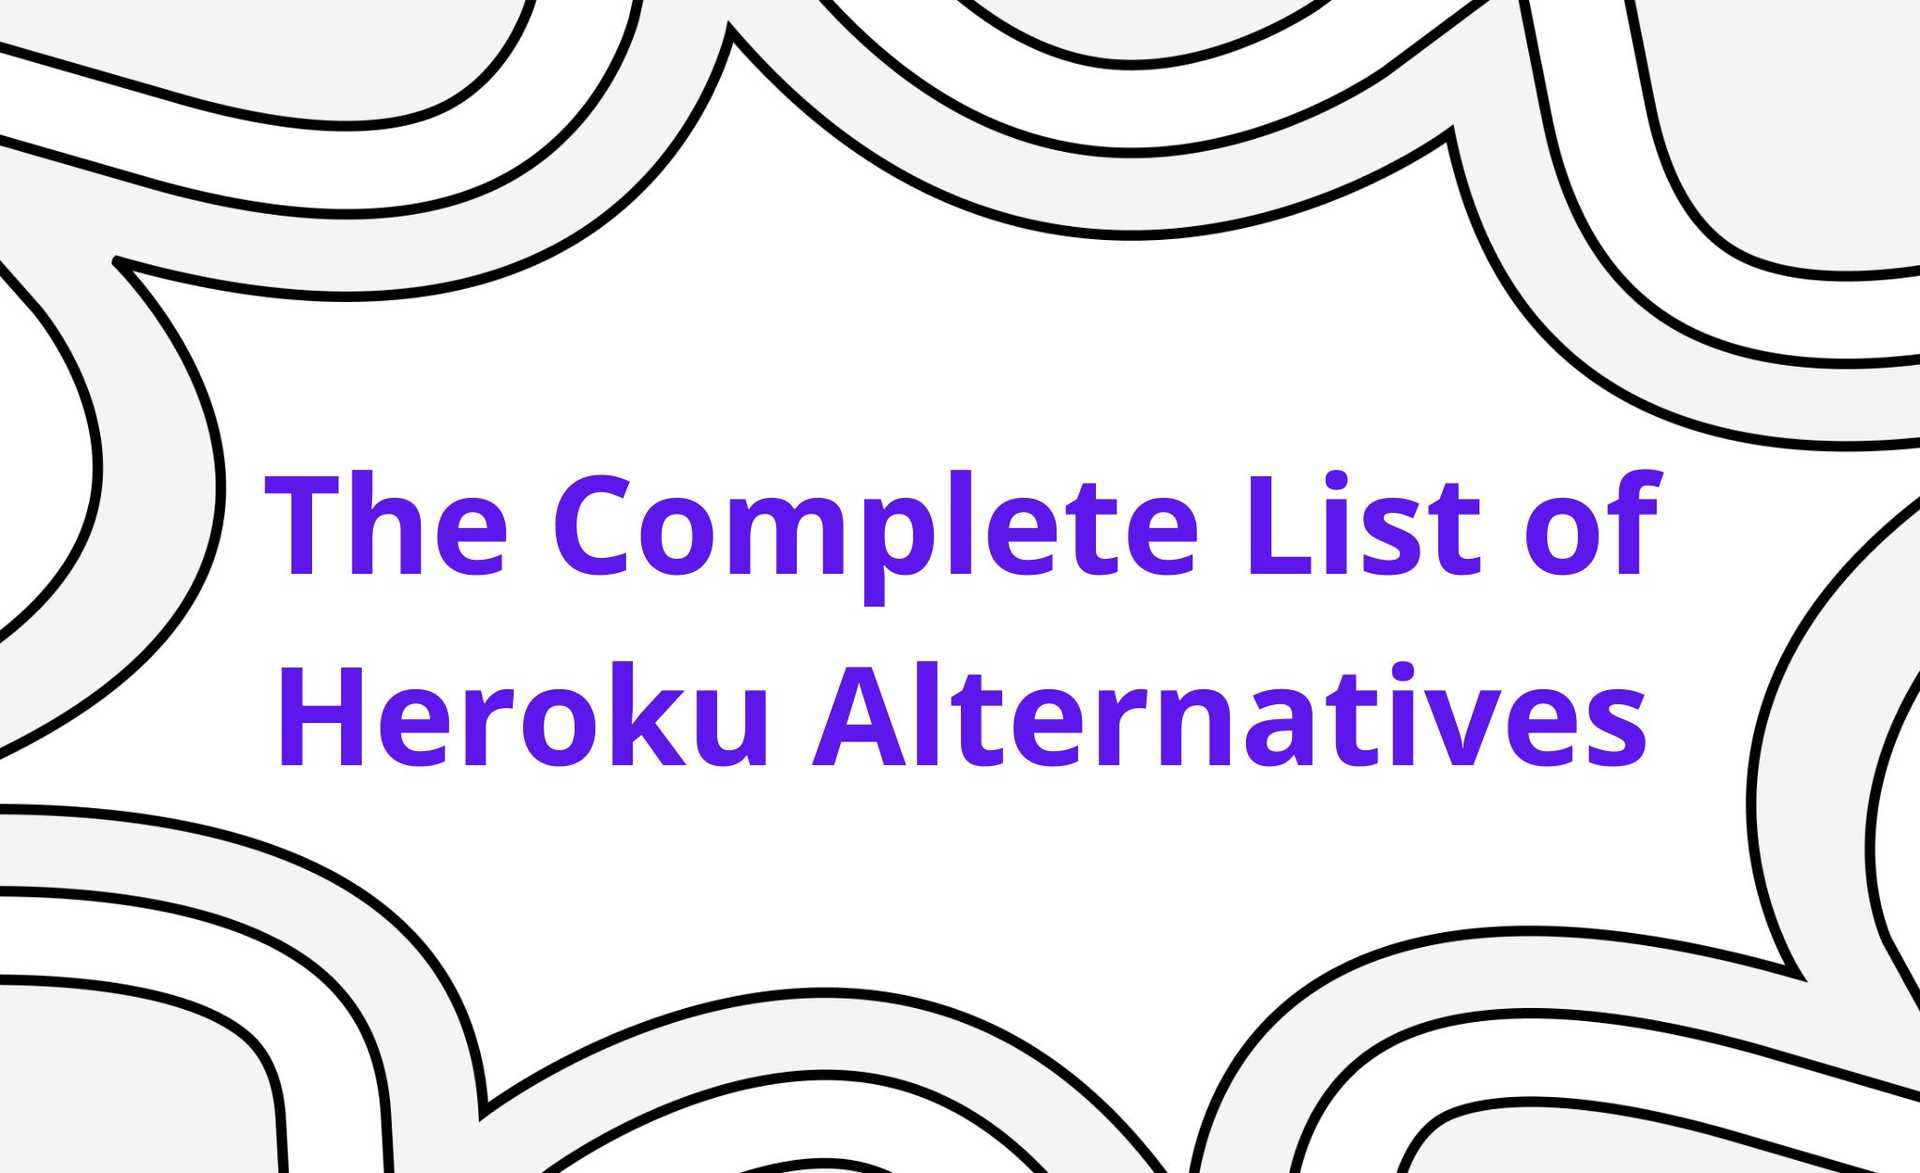 The Complete List of Heroku Alternatives You Might Want to Consider